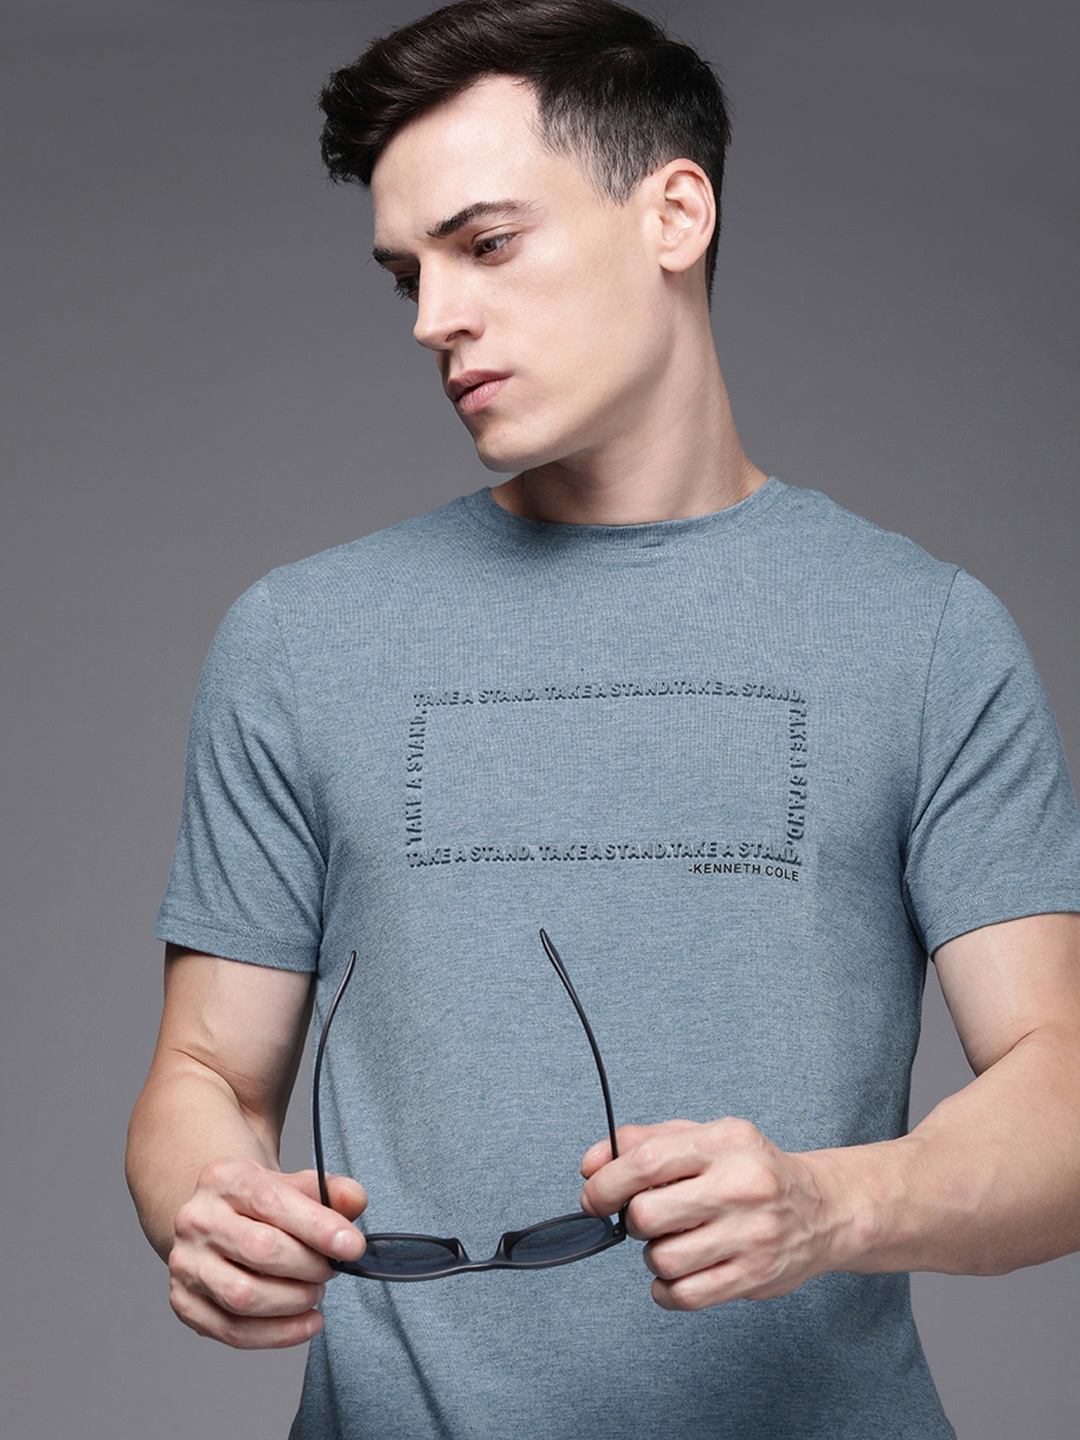 Buy Kenneth Cole Typography Embossed T Shirt - Tshirts for Men 21273022 ...